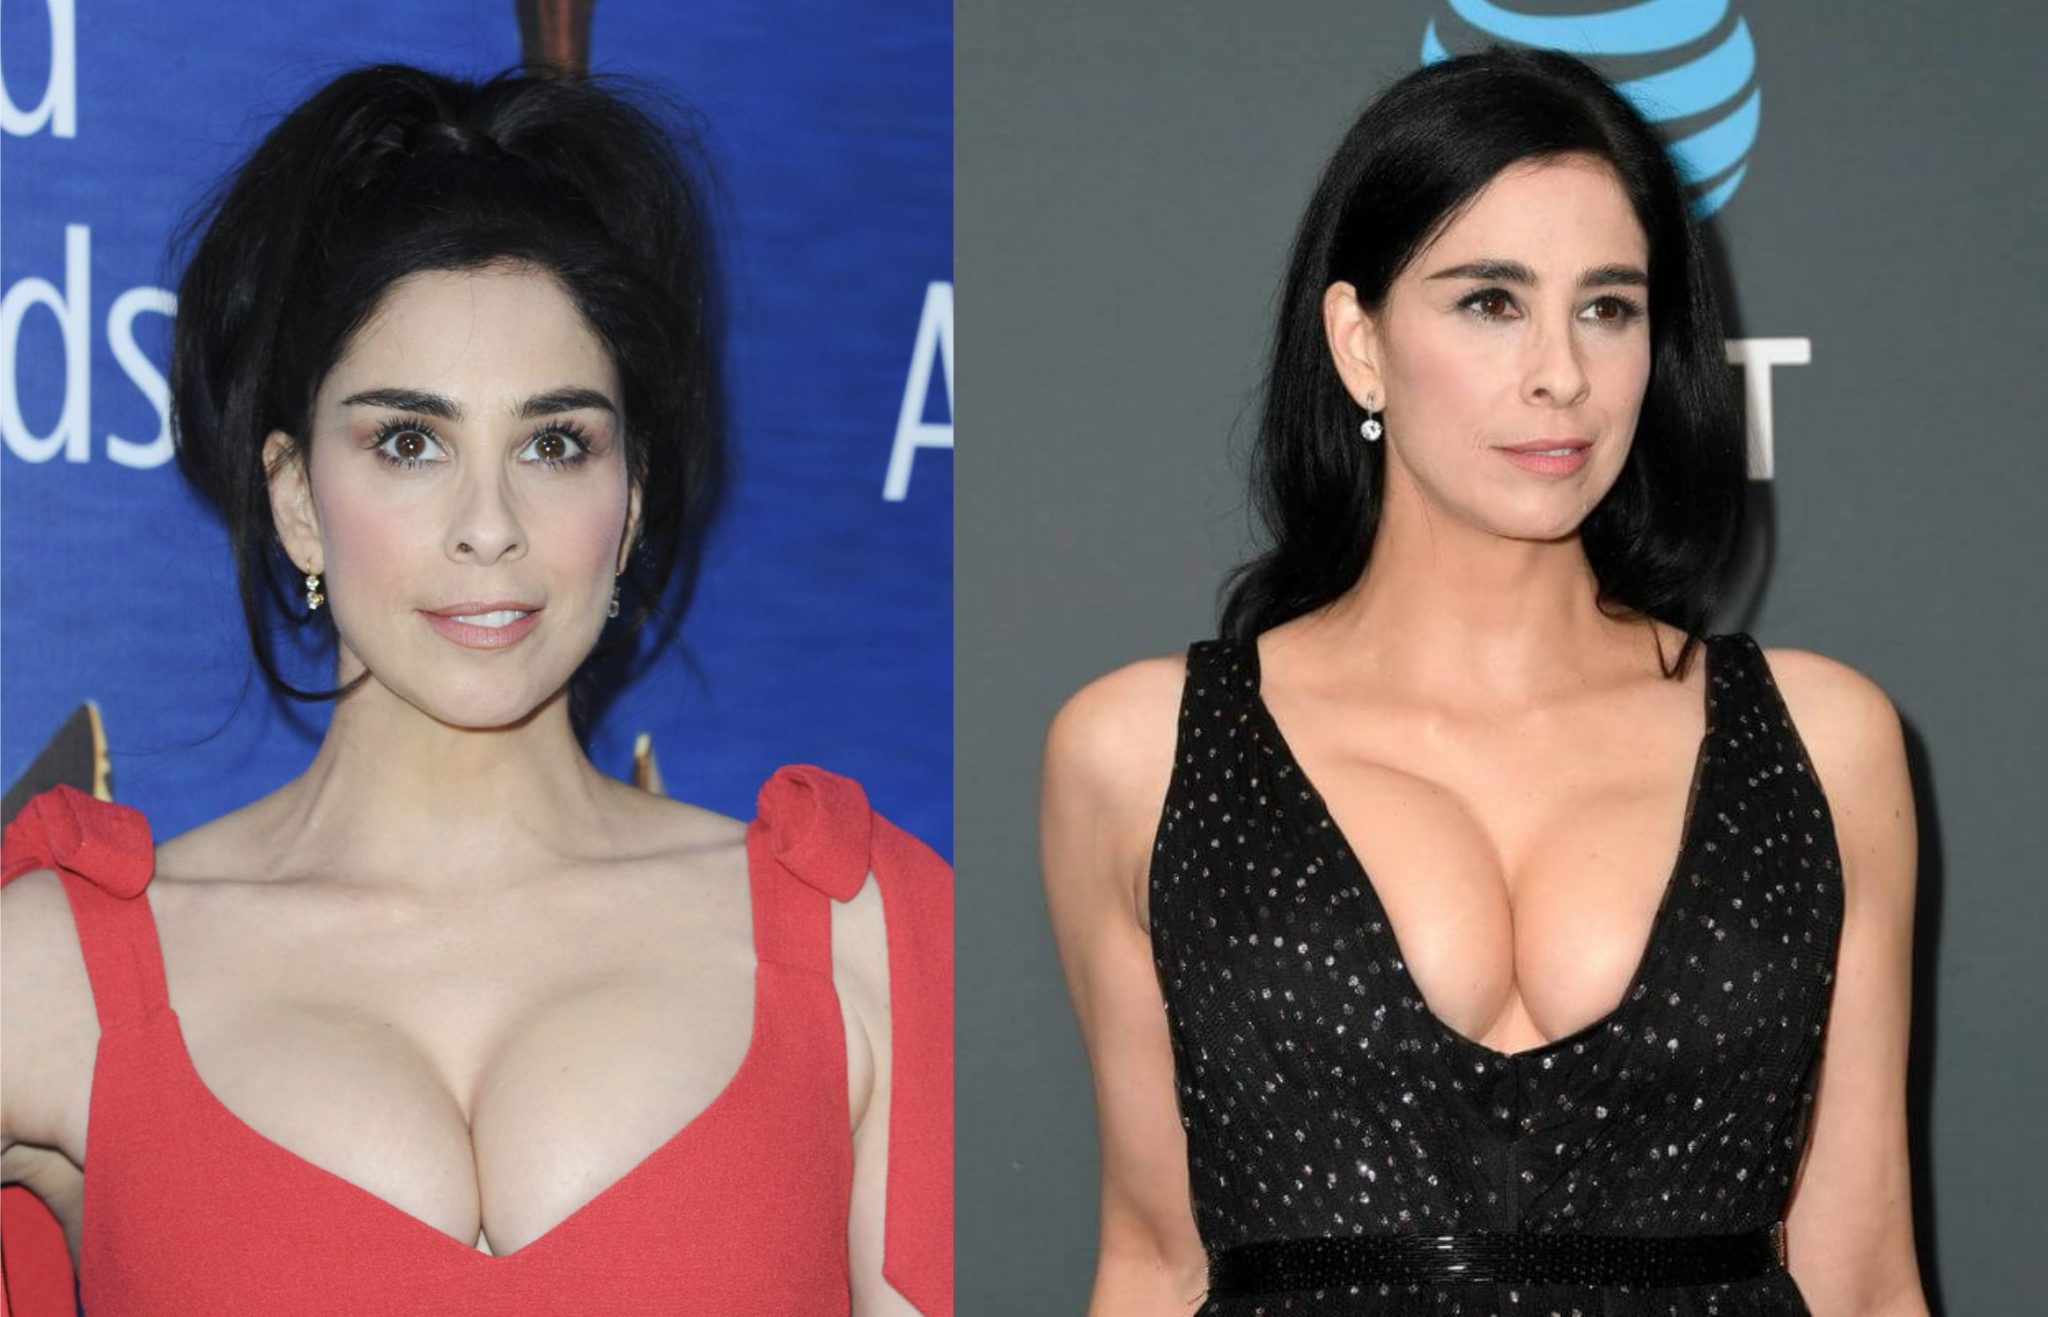 Sarah Silverman Beautiful and Hot Pictures.